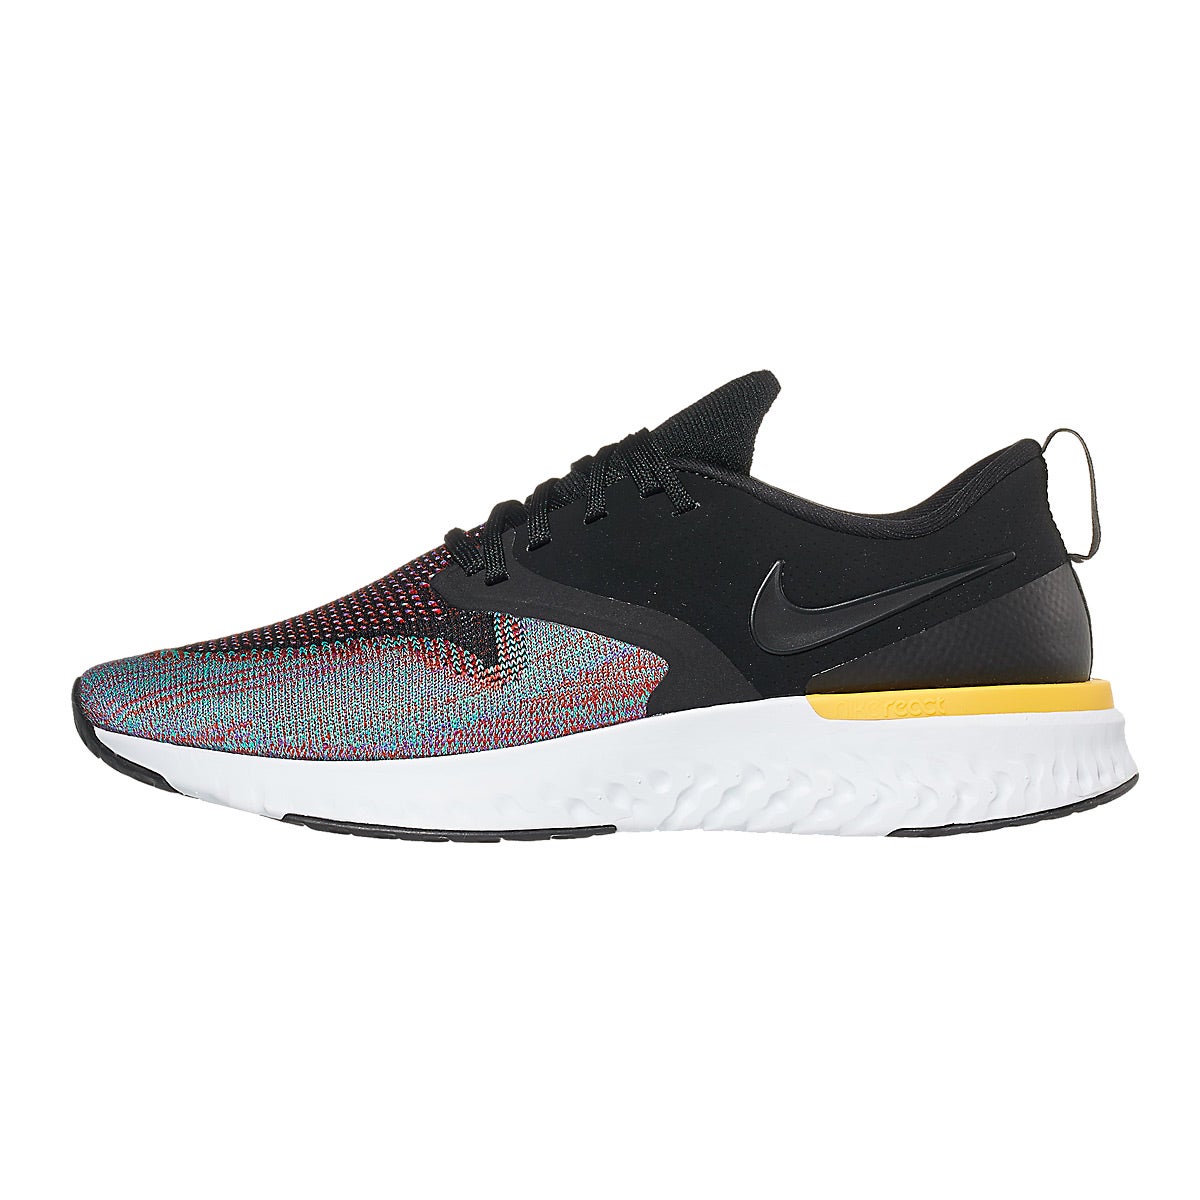 Nike Odyssey React 2 Flyknit Men's Shoes Black/Red 360° View | Running ...